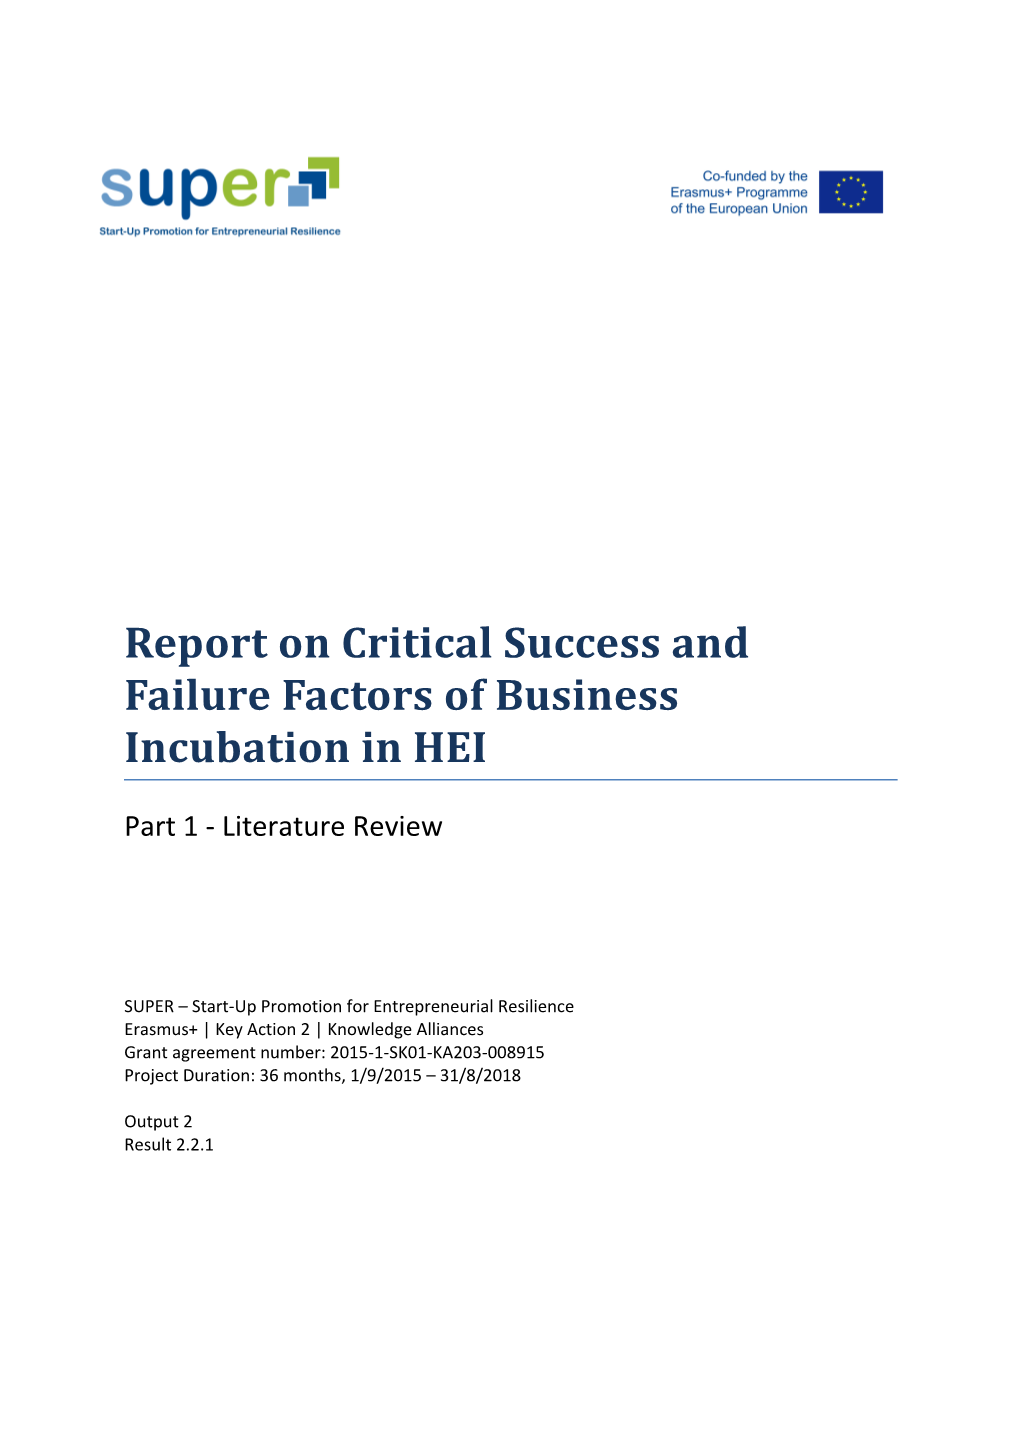 Report on Critical Success and Failure Factors of Business Incubation in HEI